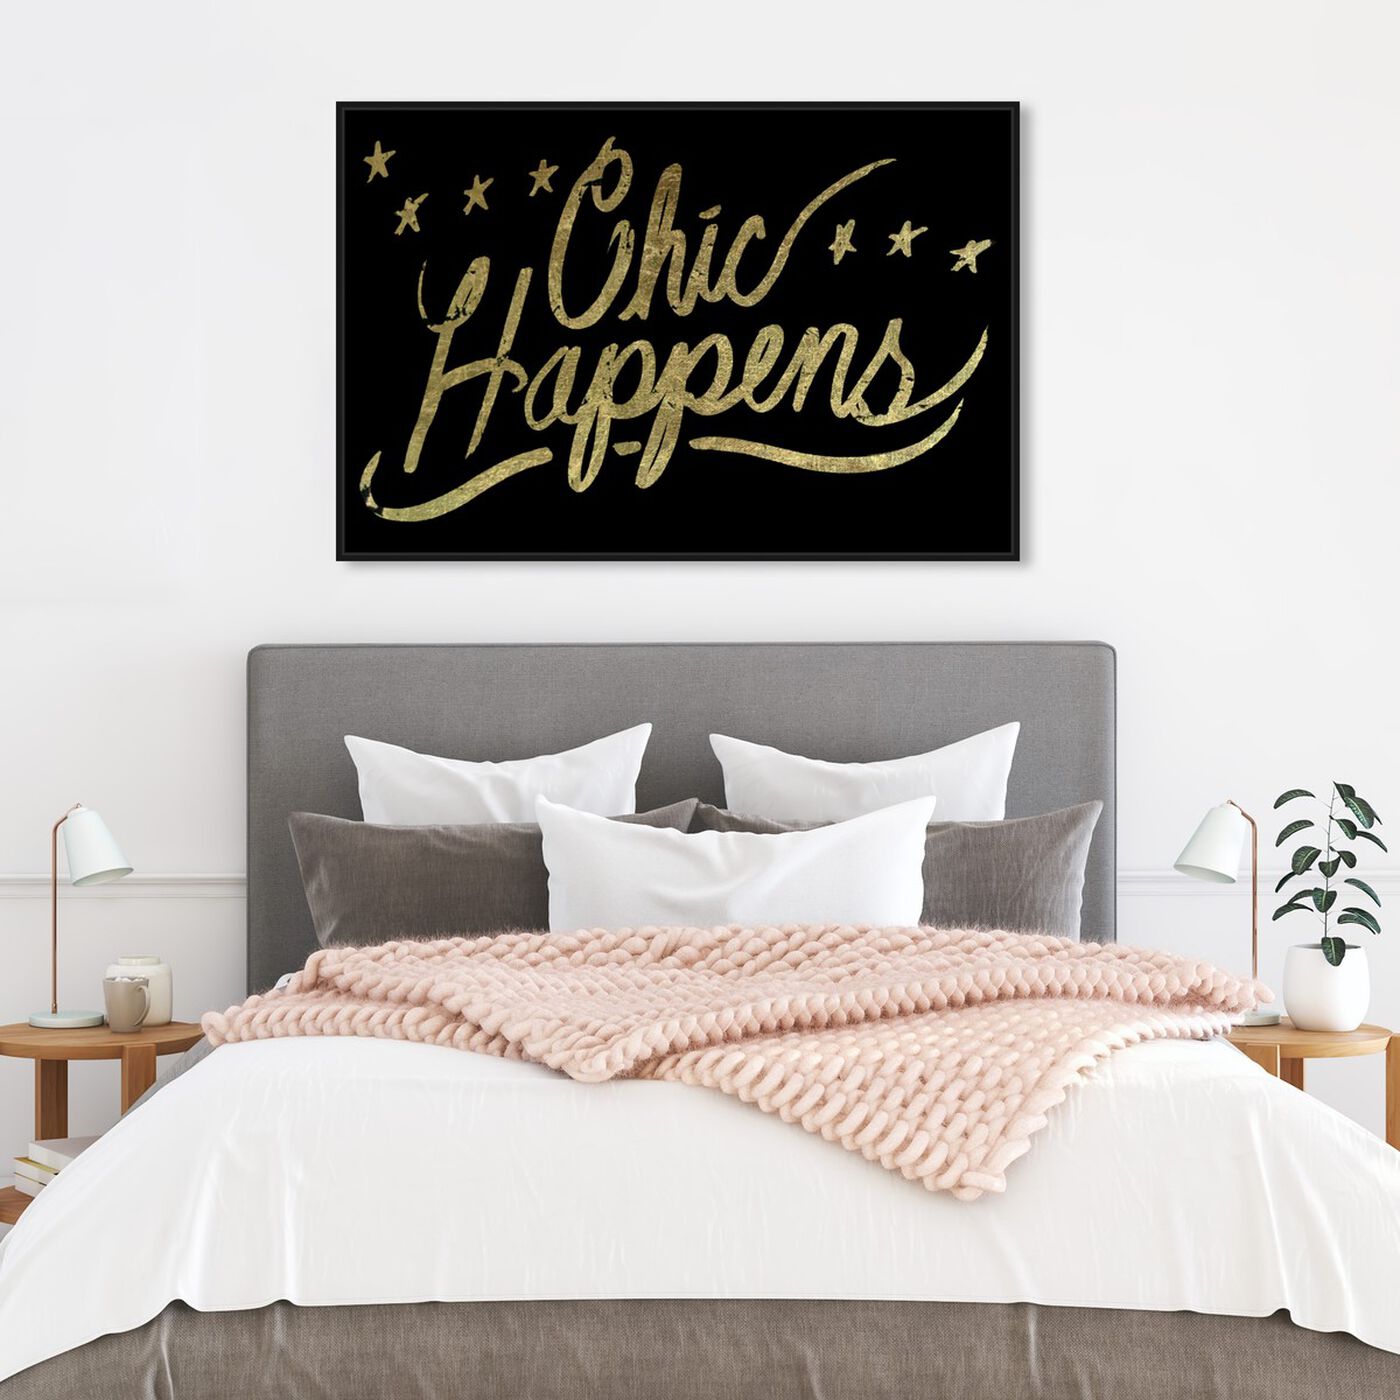 Hanging view of Chic Happens featuring typography and quotes and fashion quotes and sayings art.